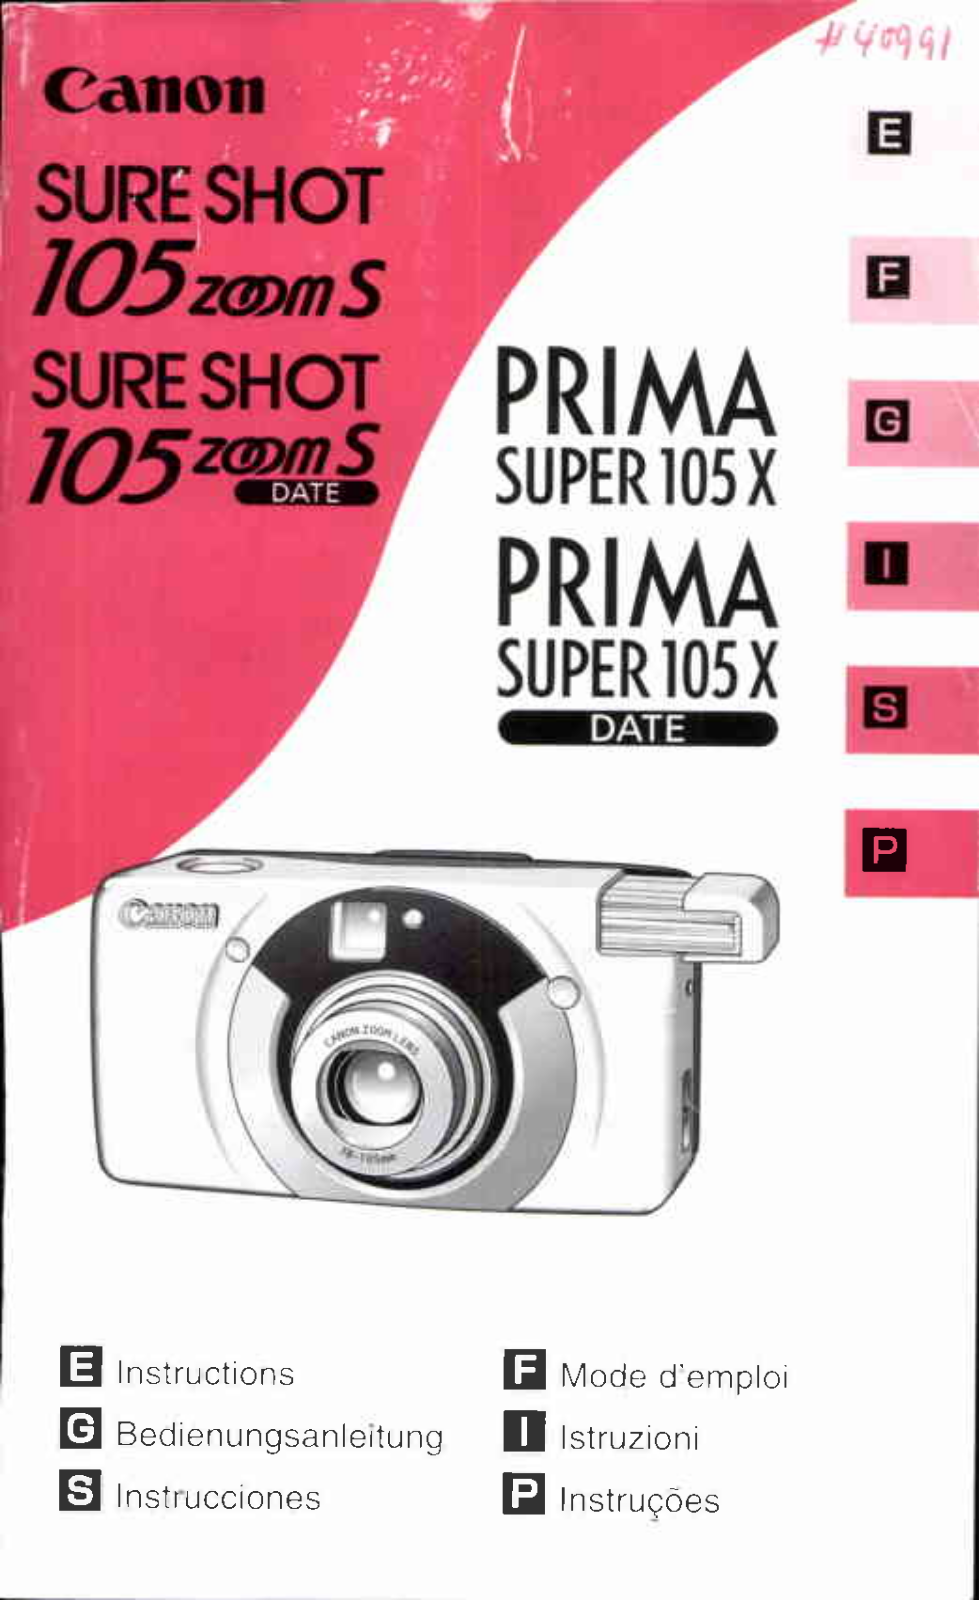 Canon Sure Shot 105 ZOOM S User Manual